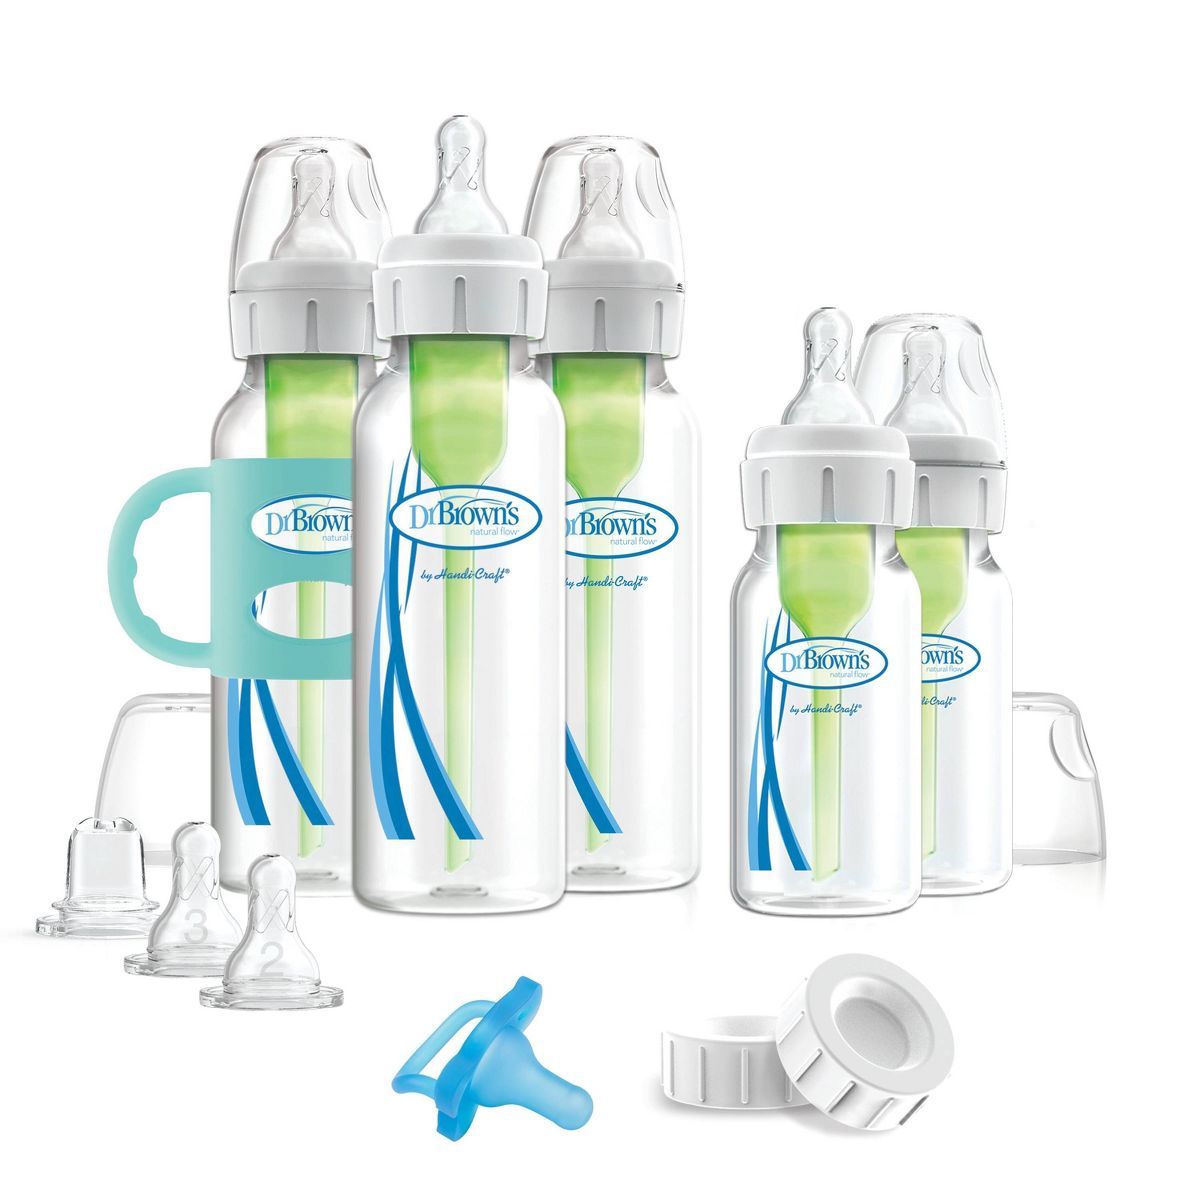 Dr. Brown's Options+ Anti-Colic Baby Bottle Essentials Gift Set - 0-6 Months | Target